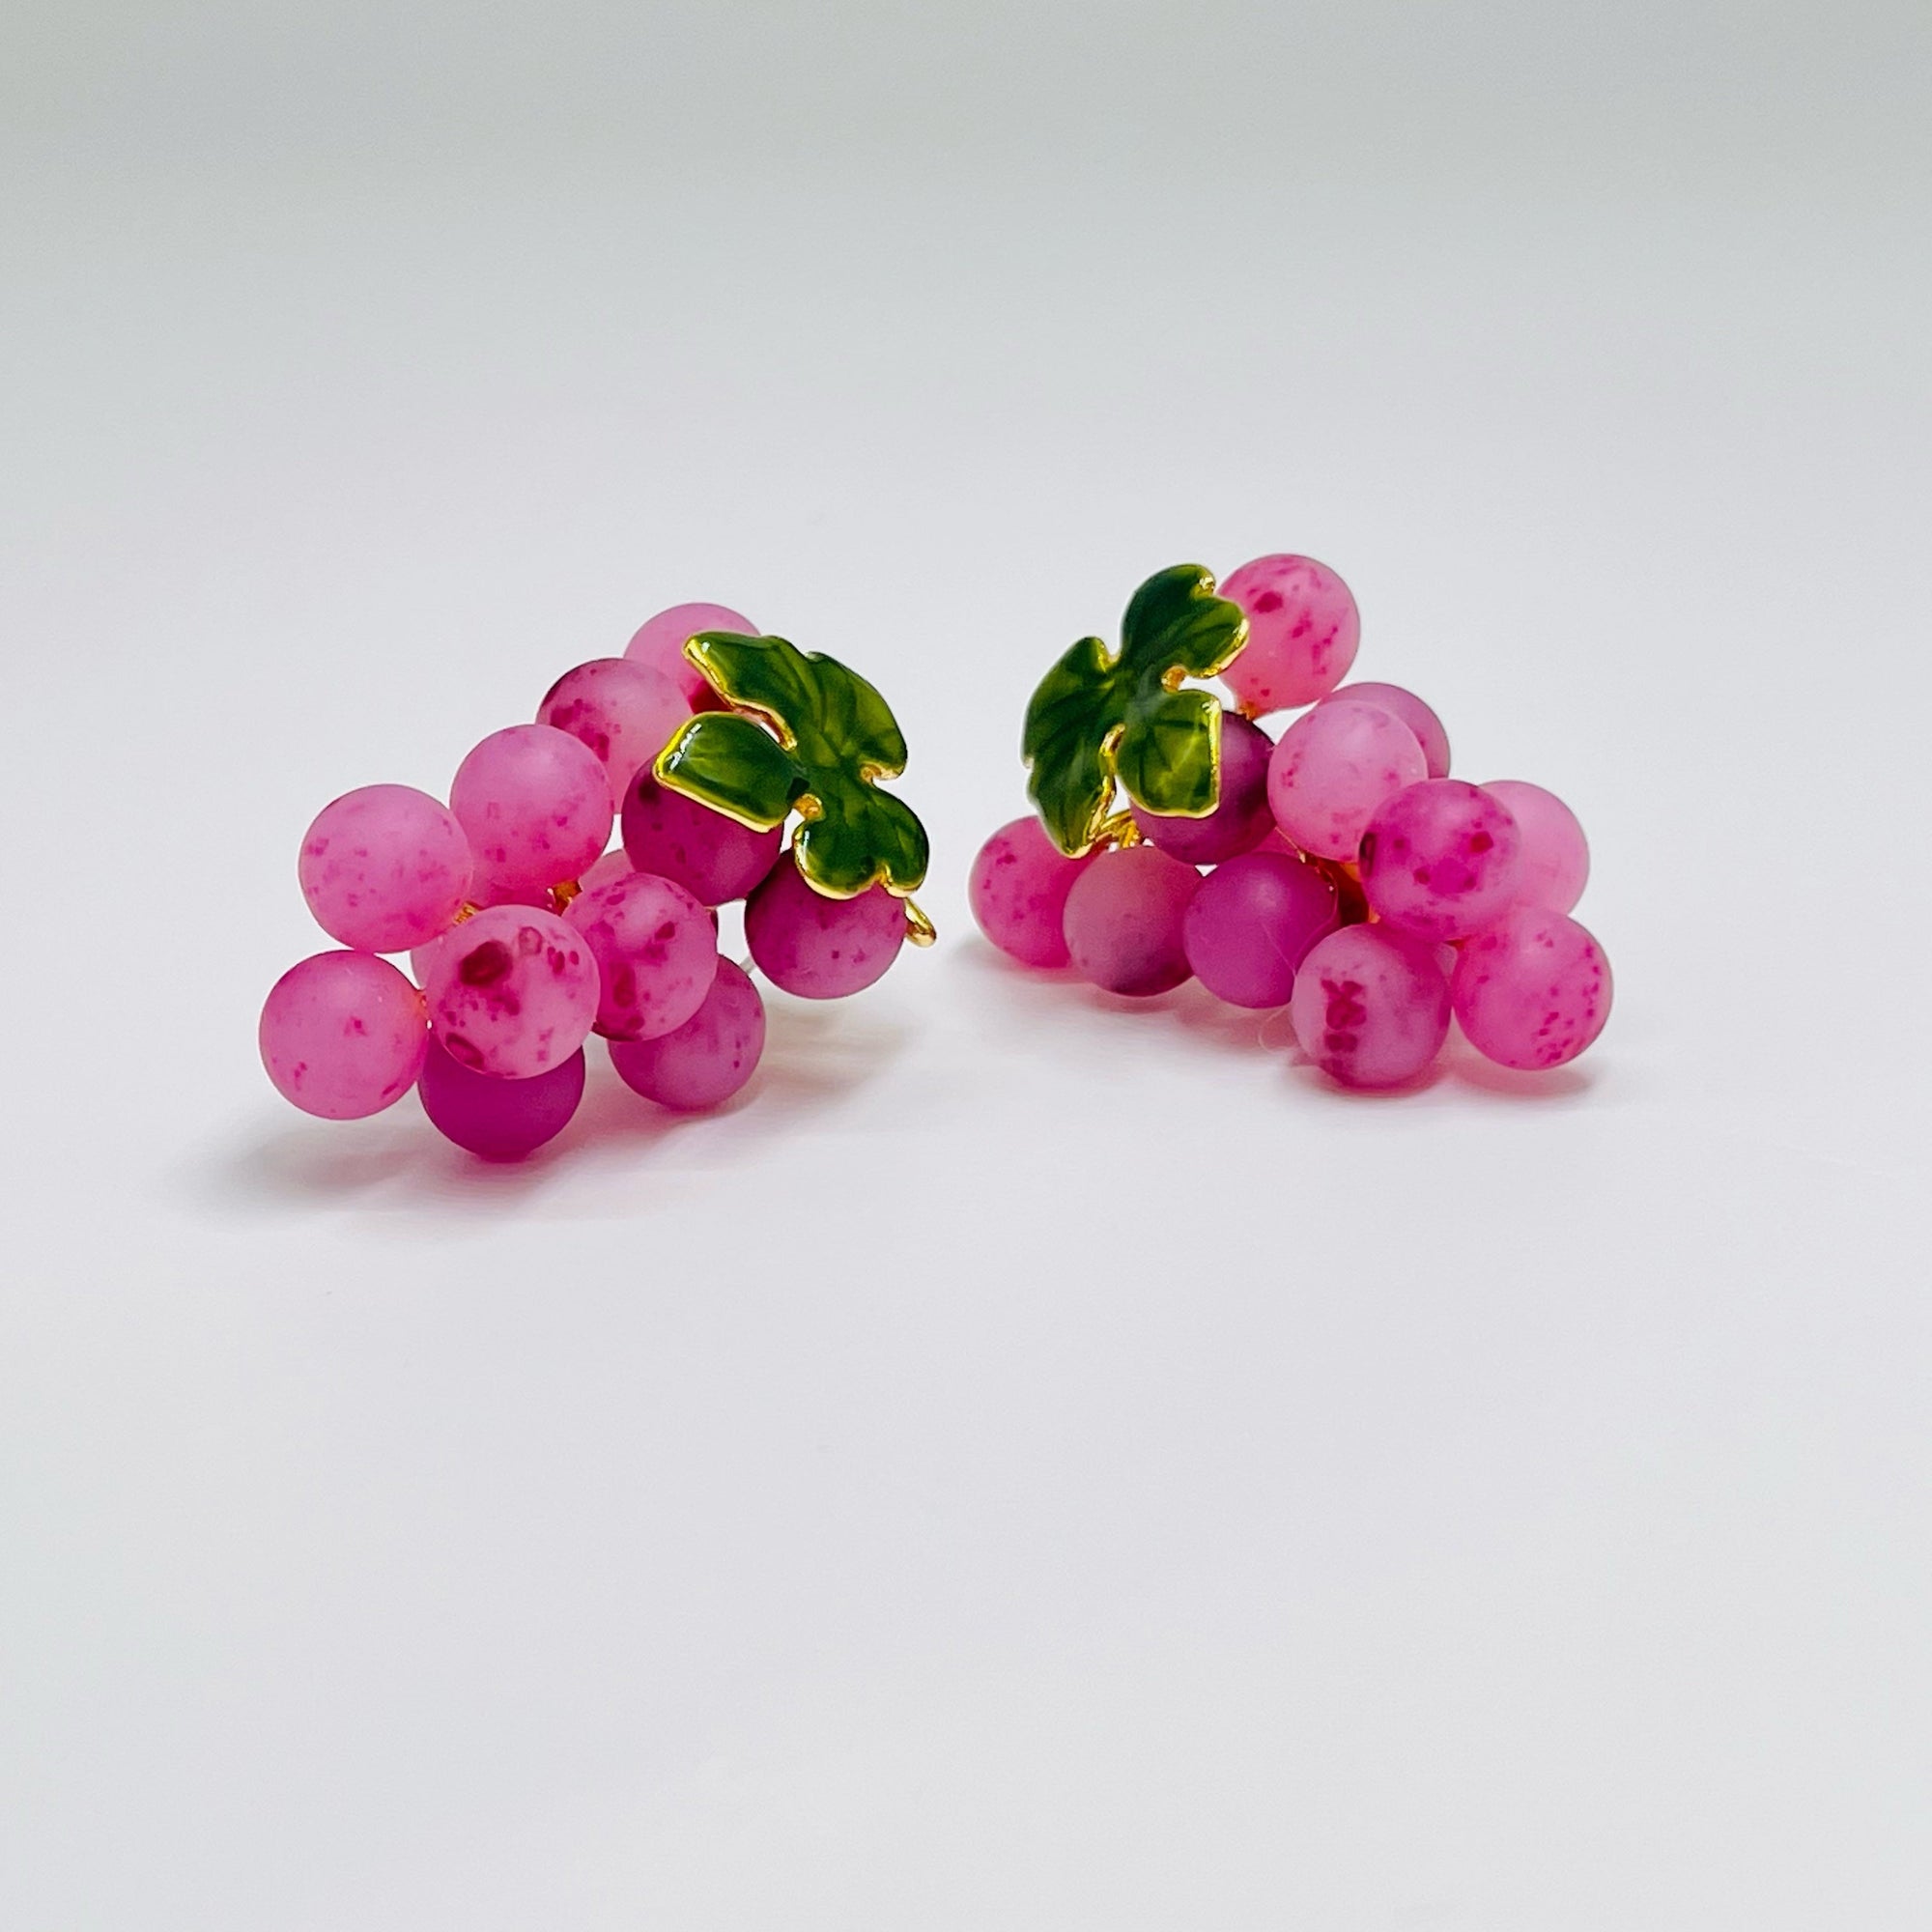 Red grapes earrings